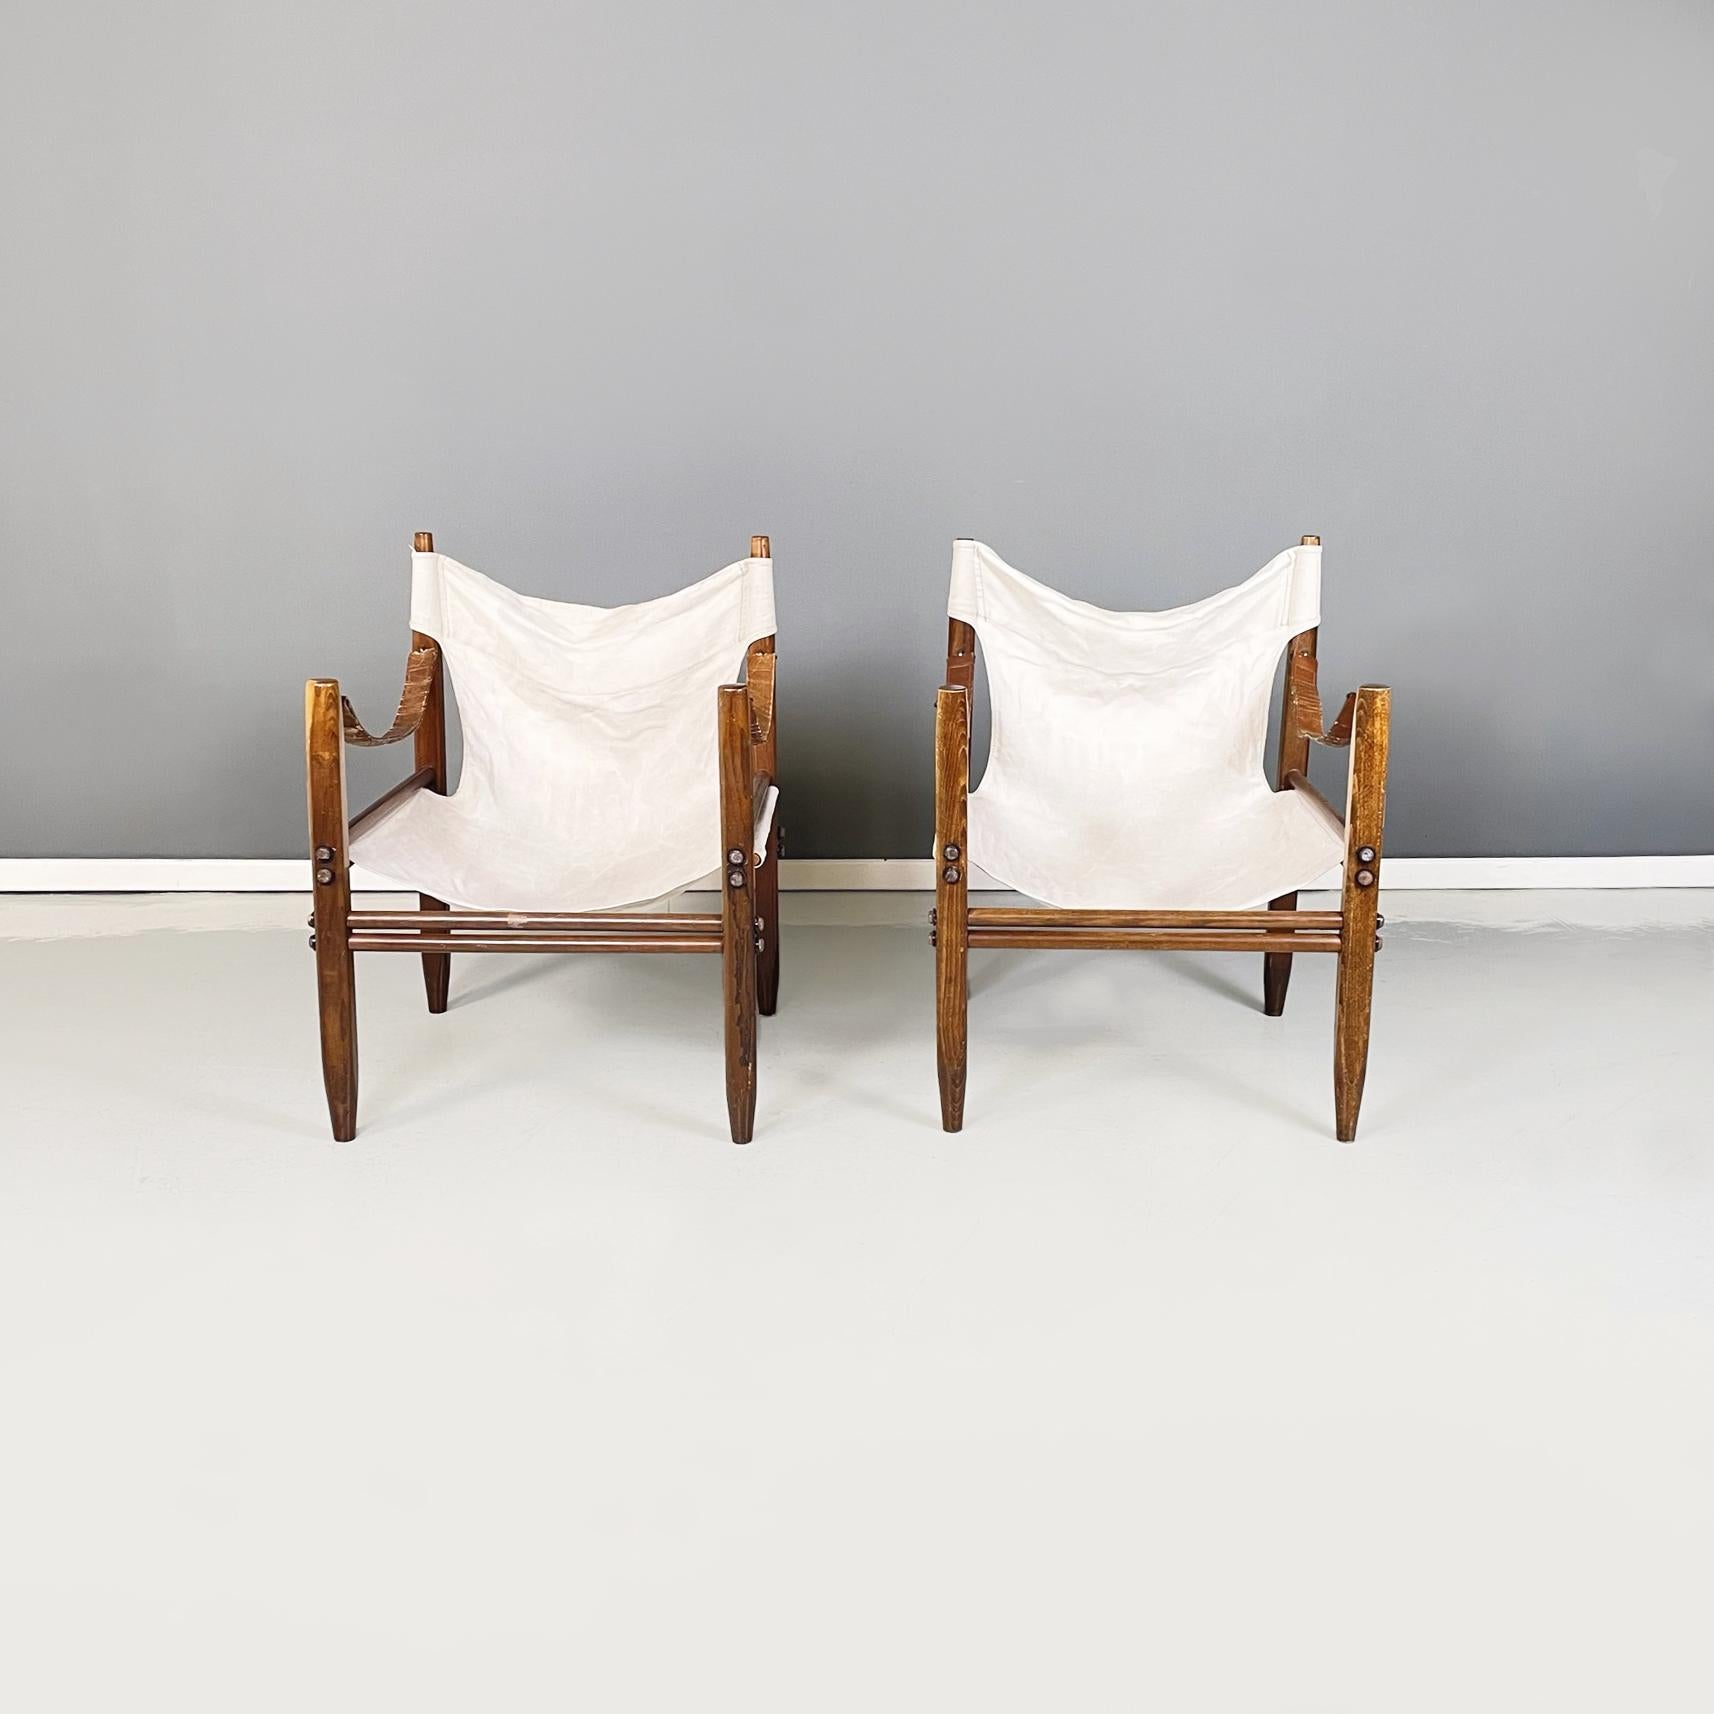 Italian midcentury armchairs Oasi 85 by Gian Franco Legler for Zanotta, 1960s
Pair of armchairs mod. Oasi 85, also known as Safari, in beige fabric and wood. The seat and backrest are composed of a single fabric, fixed to the structure. The